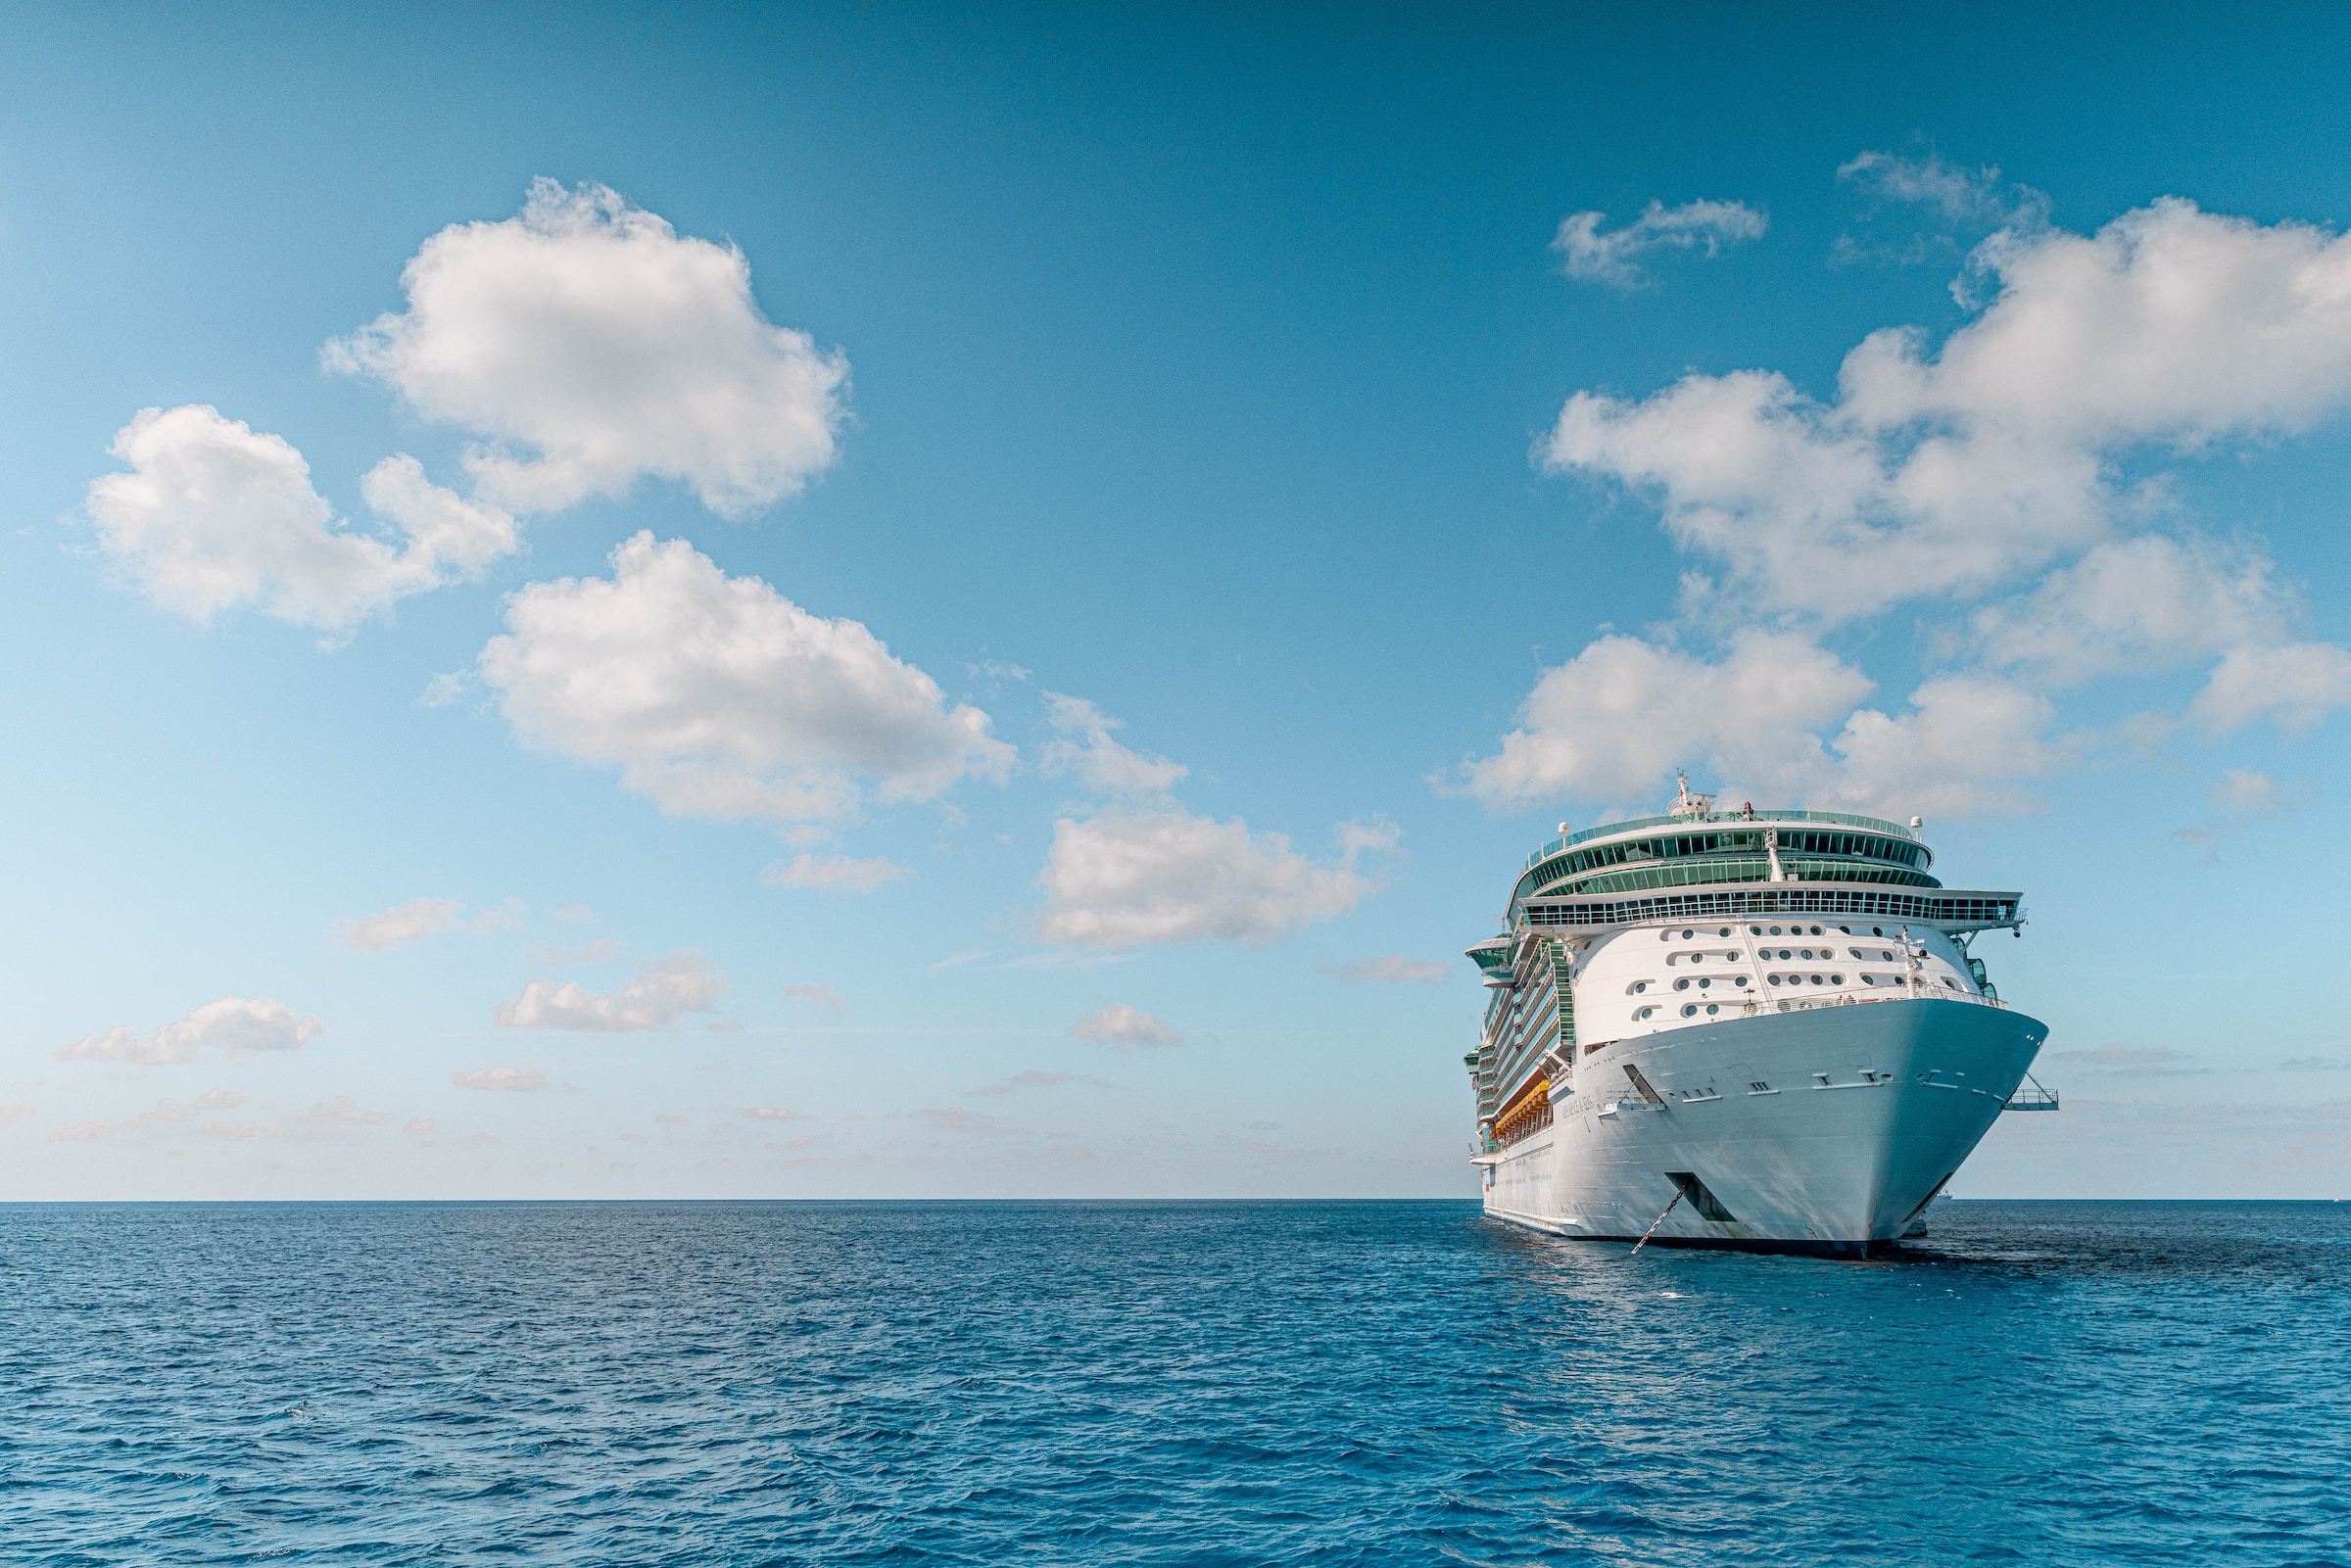 Anything But a (Spring) Break: How FieldCore’s Aero Team Goes Above and Beyond for Cruise Line Customers